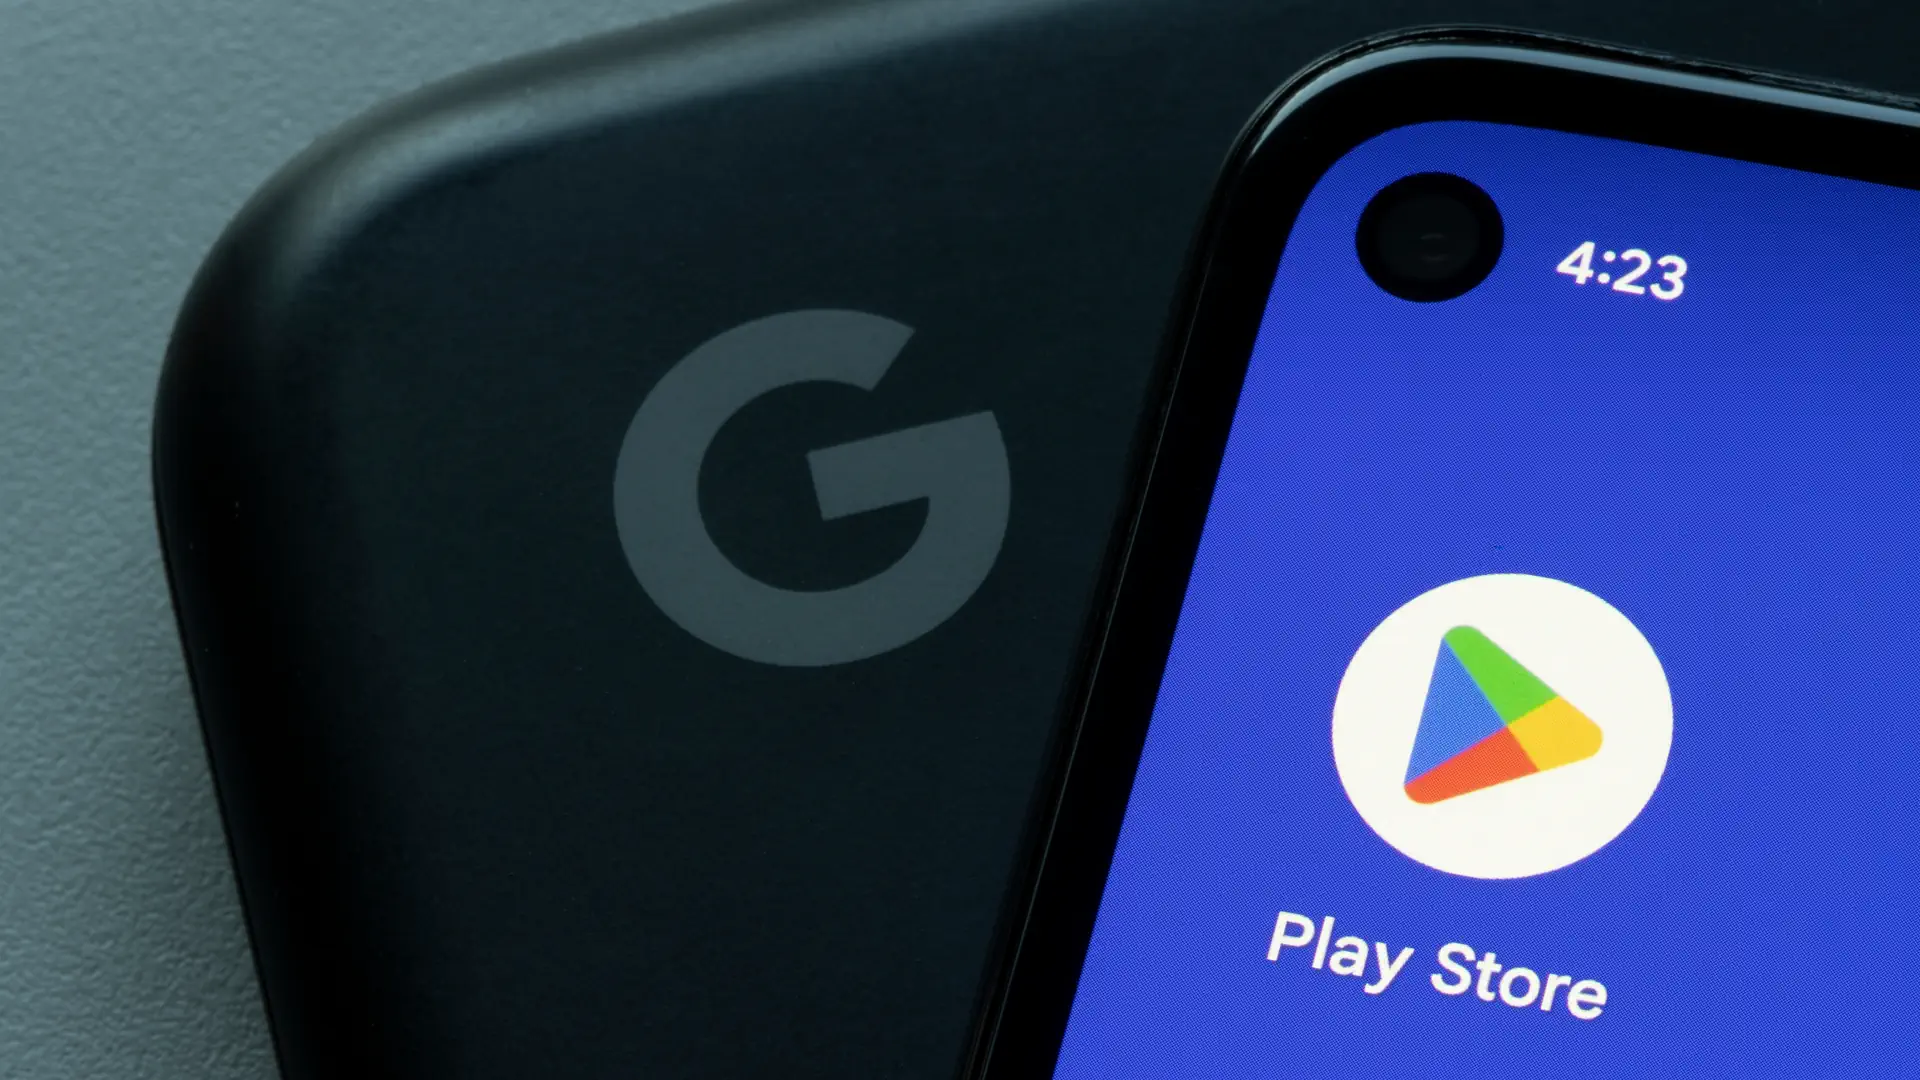 The Google Play Store will allow you to remotely uninstall apps from other devices